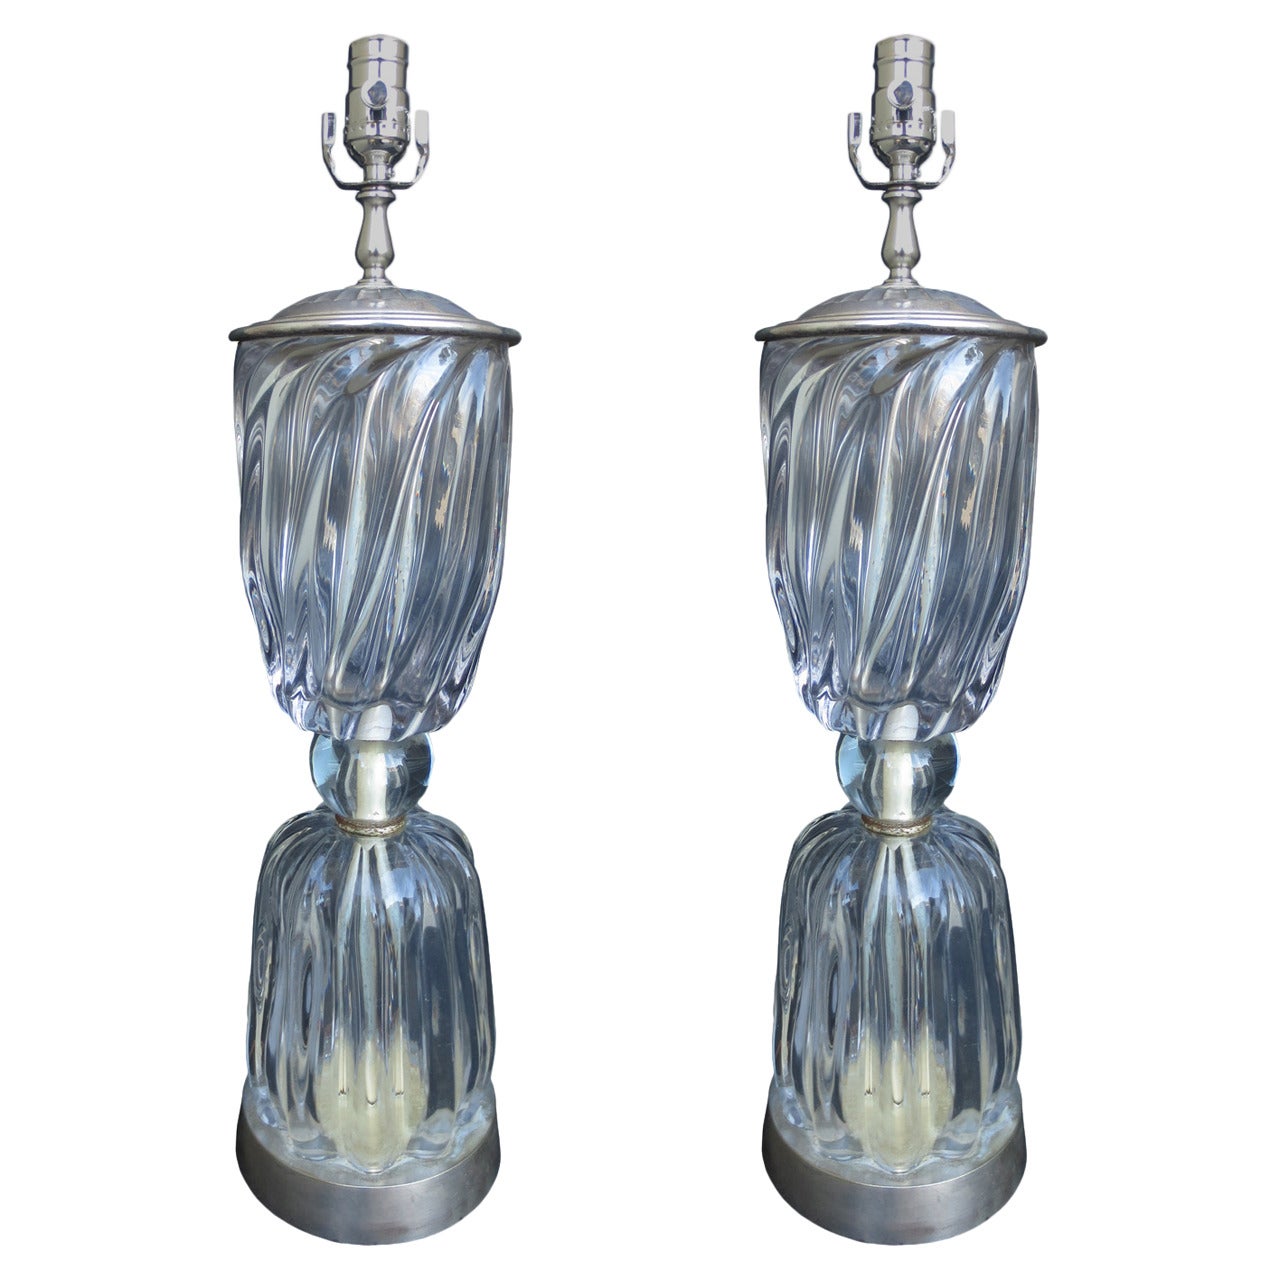 Pair of Venini Glass and Silver Lamps